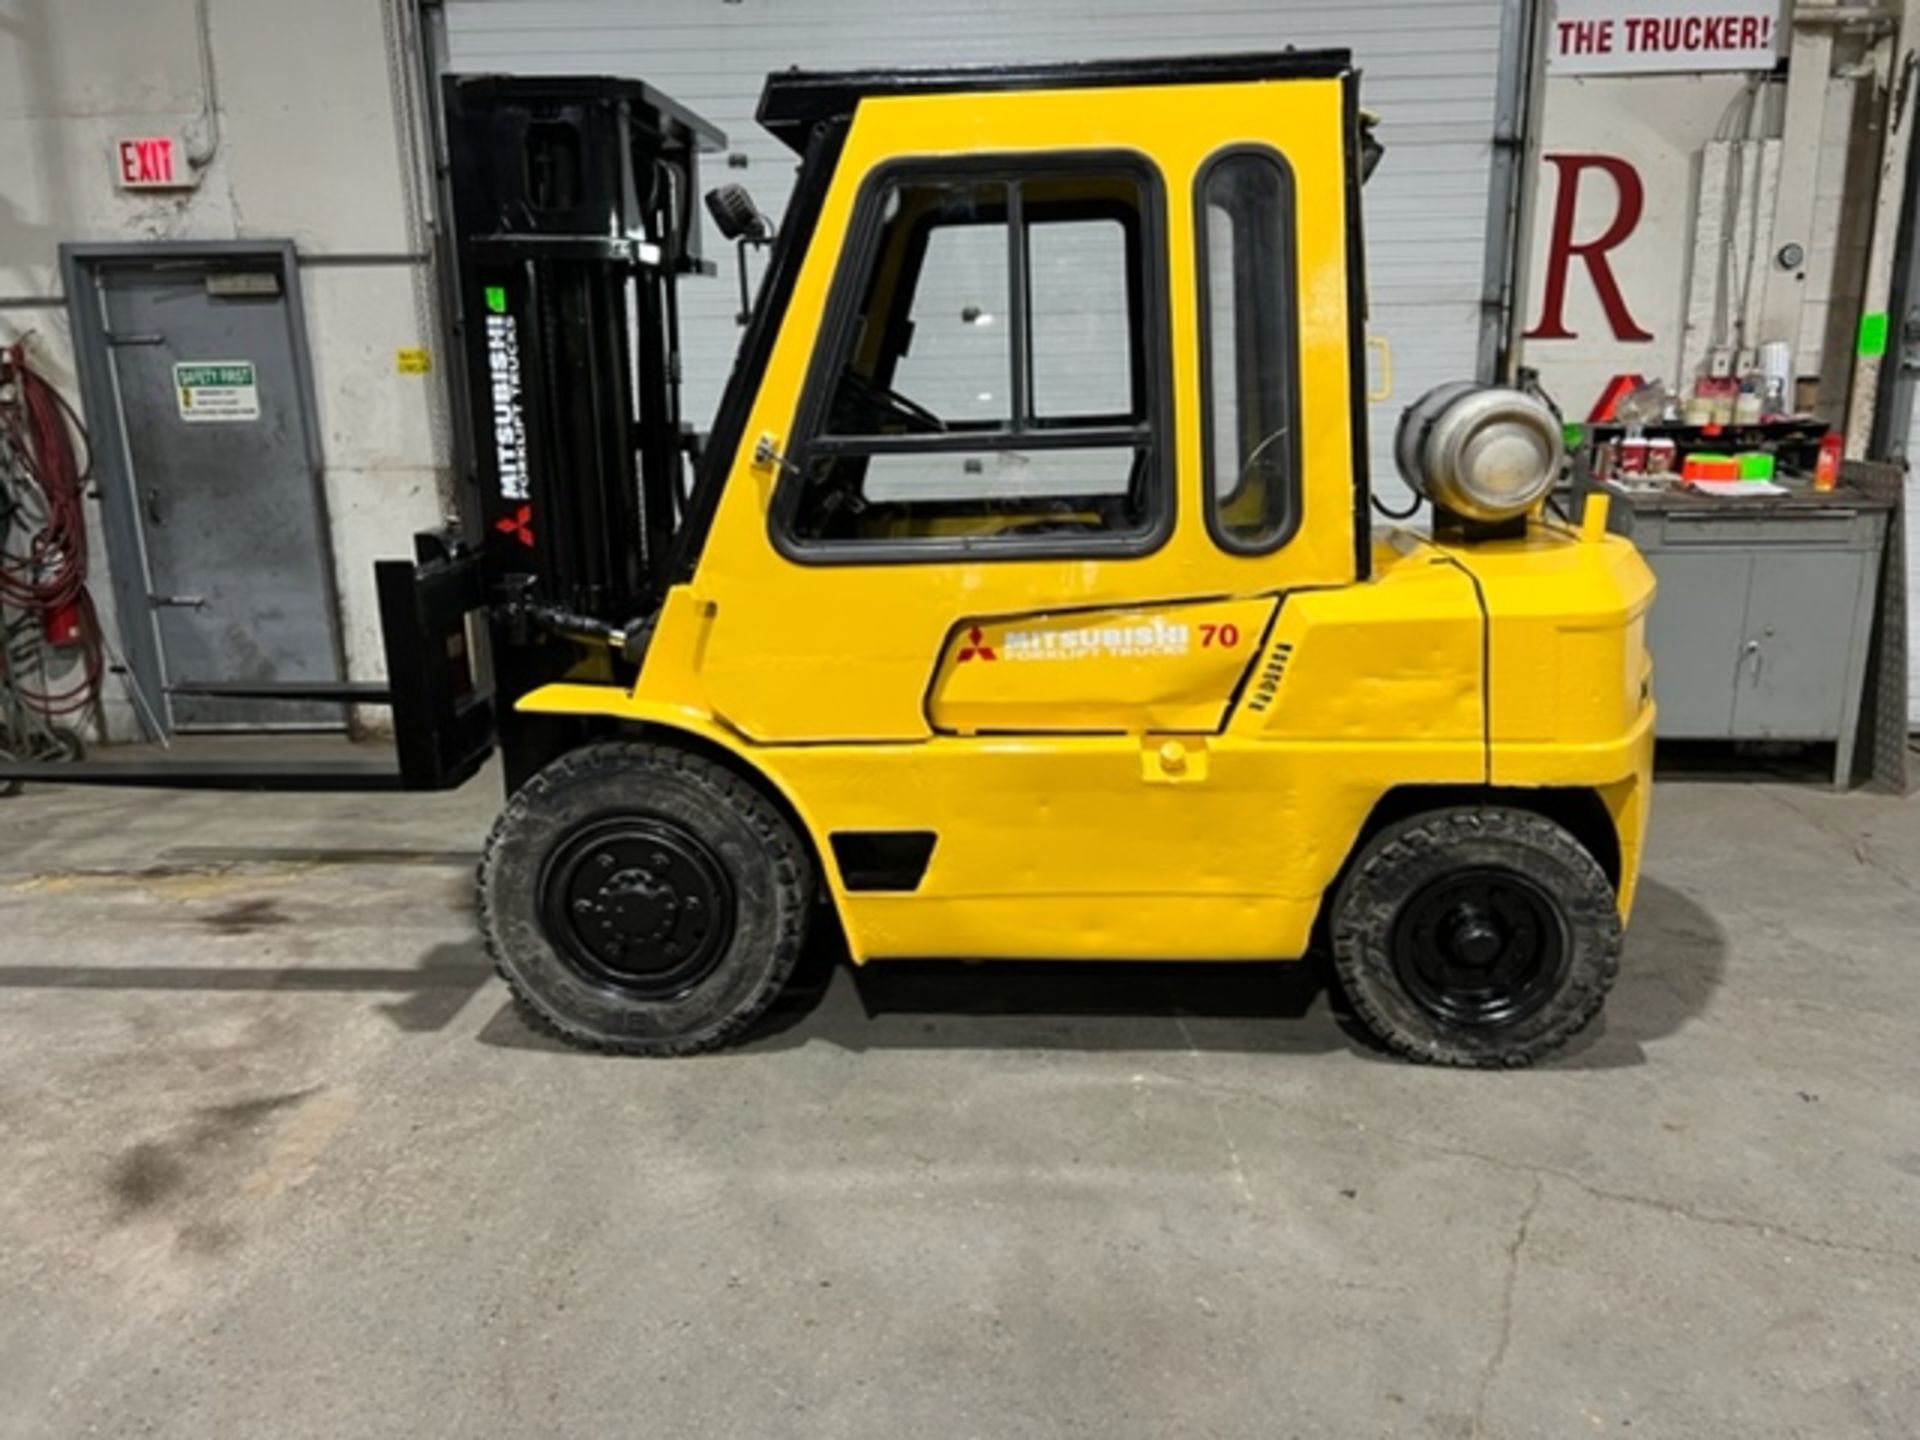 NICE Mitsubishi model 70 - 7,000lbs Capacity OUTDOOR Forklift LPG (propane) with 3-stage mast